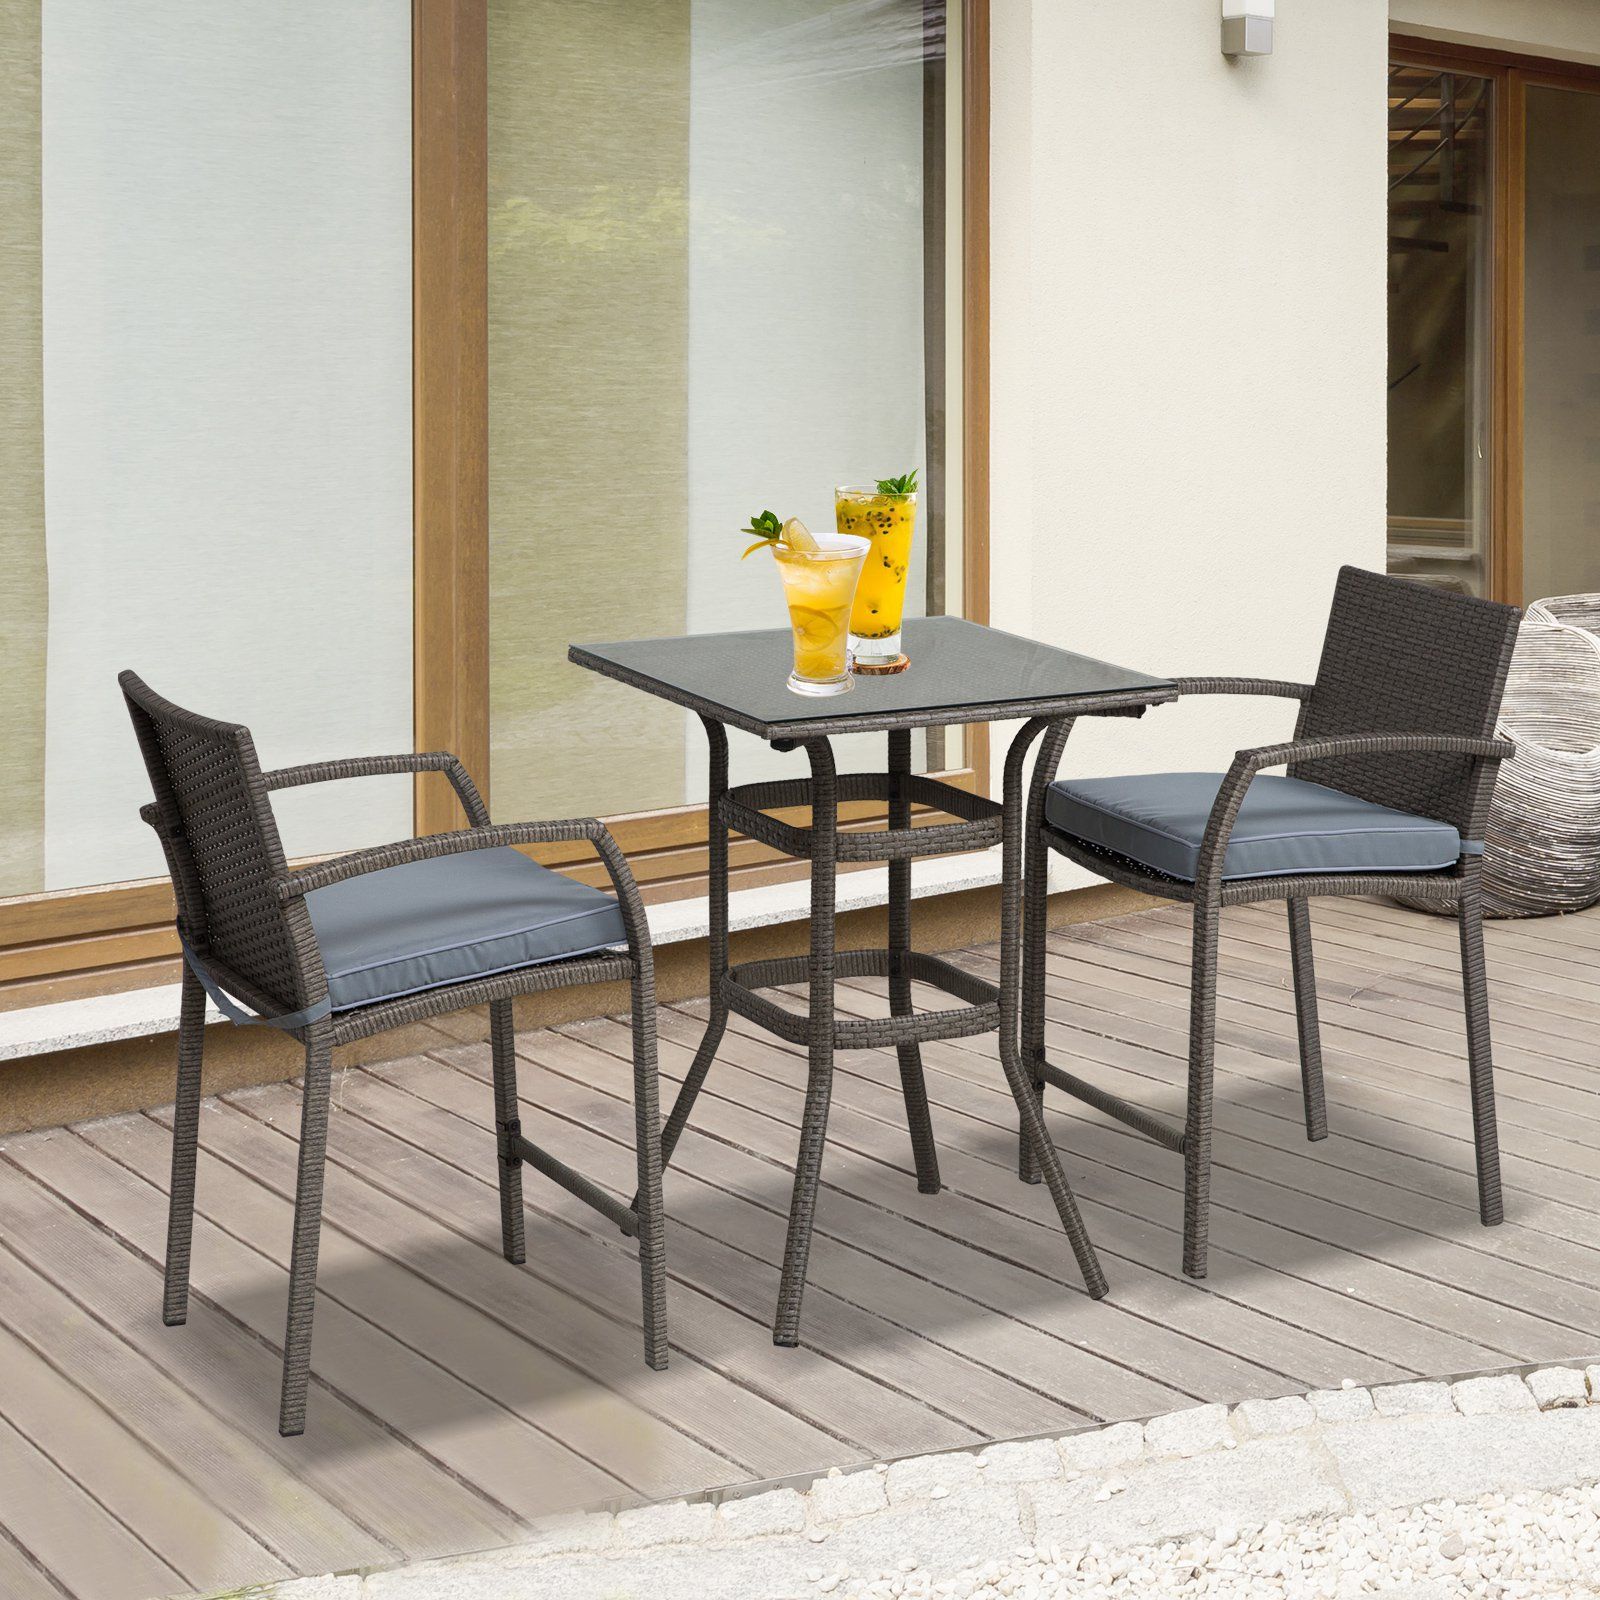 Outsunny 3 Piece Outdoor Pe Rattan Wicker Bar Table Stool Bistro Set Throughout Outdoor Wicker Cafe Dining Sets (View 12 of 15)